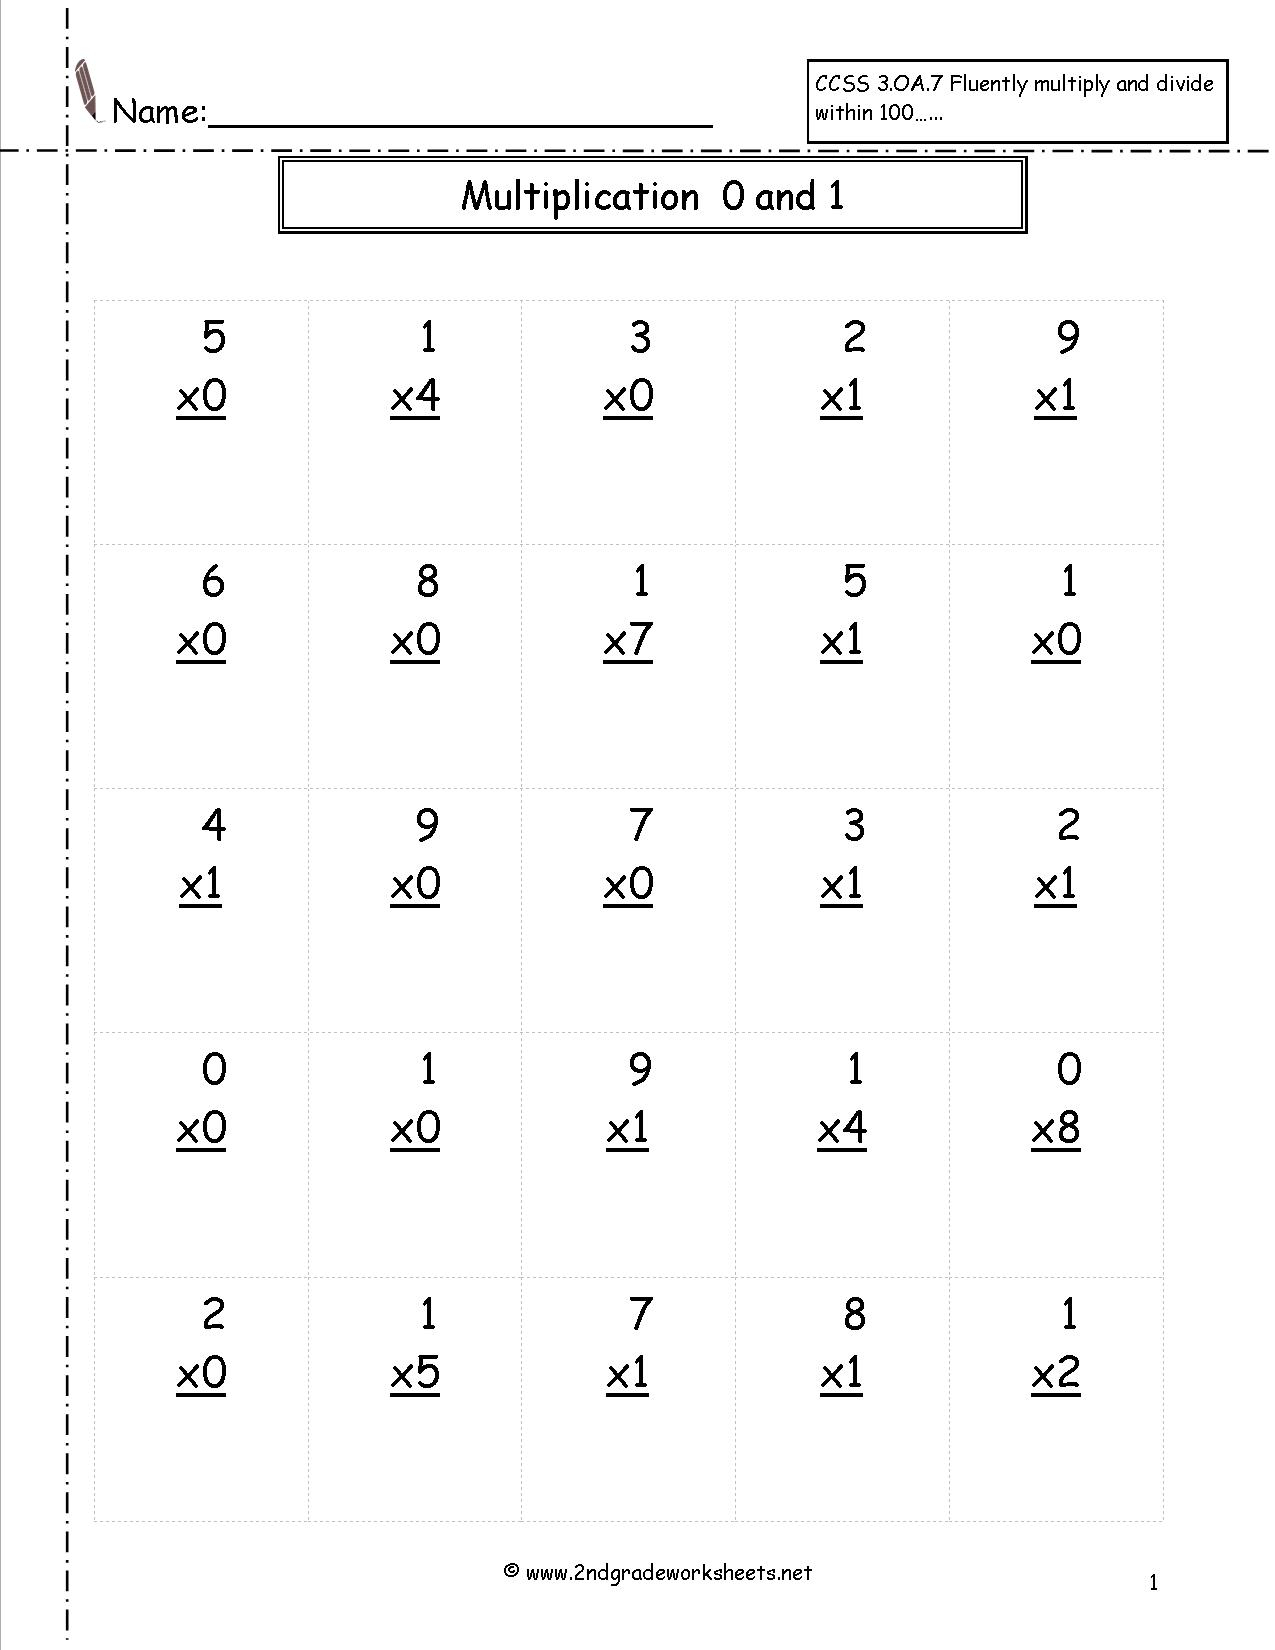 Multiplication Worksheets And Printouts inside 3 Multiplication Worksheets